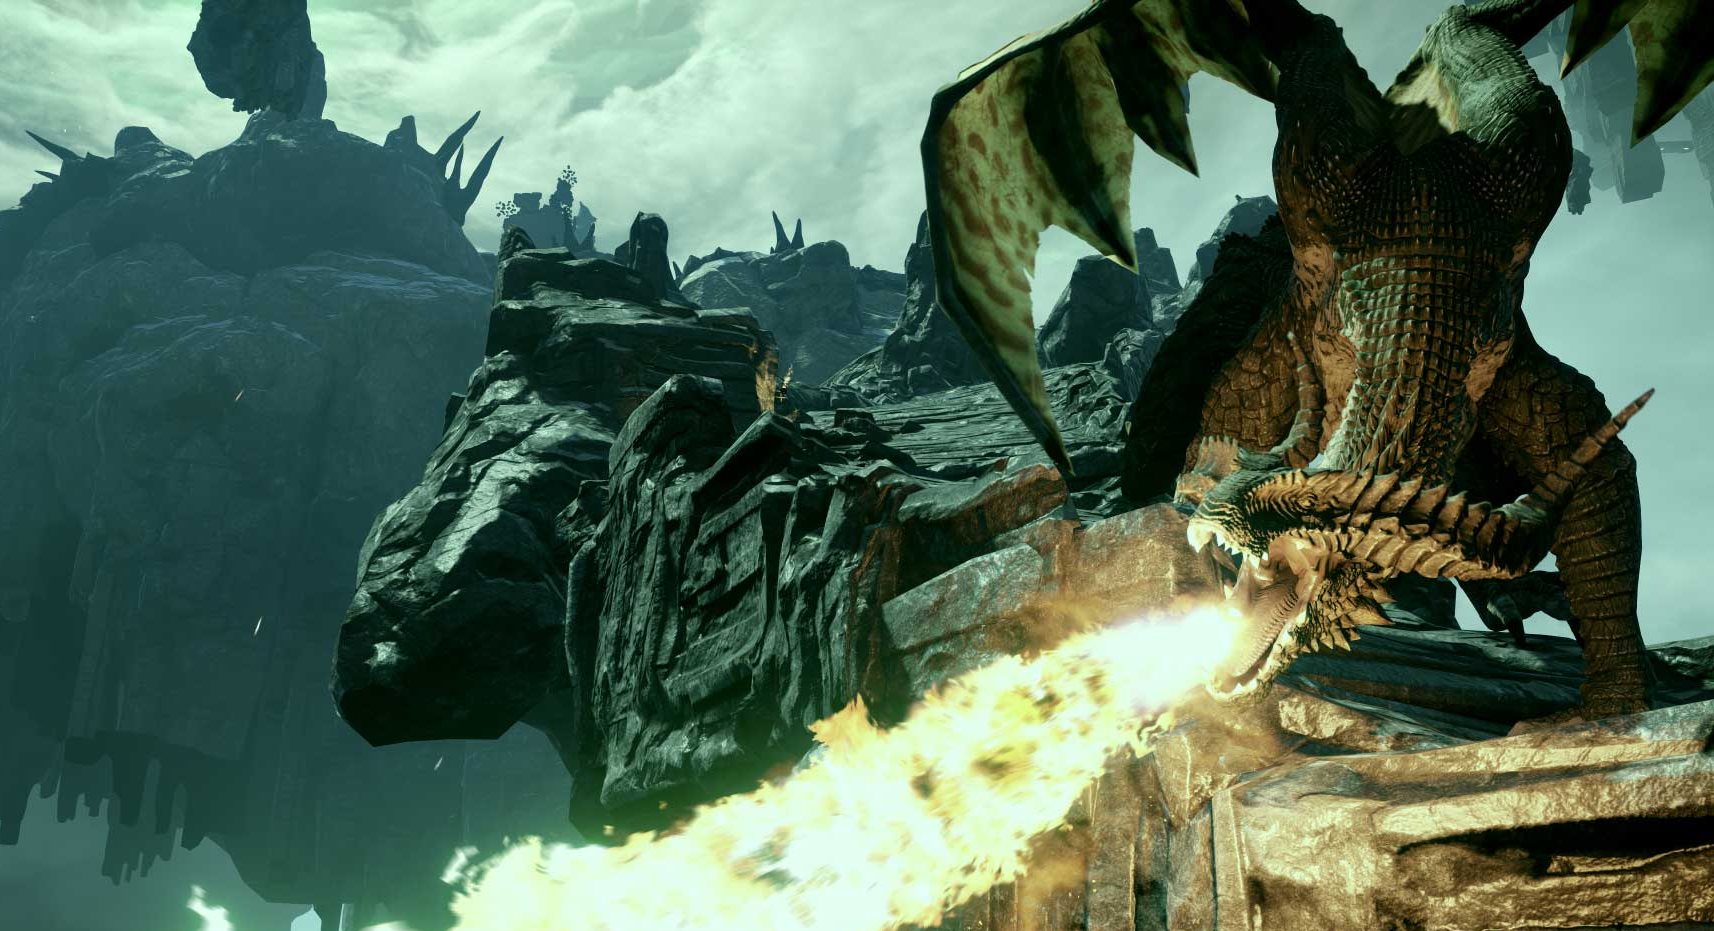 GOTY 2014 Game of the Year – Dragon Age: Inquisition